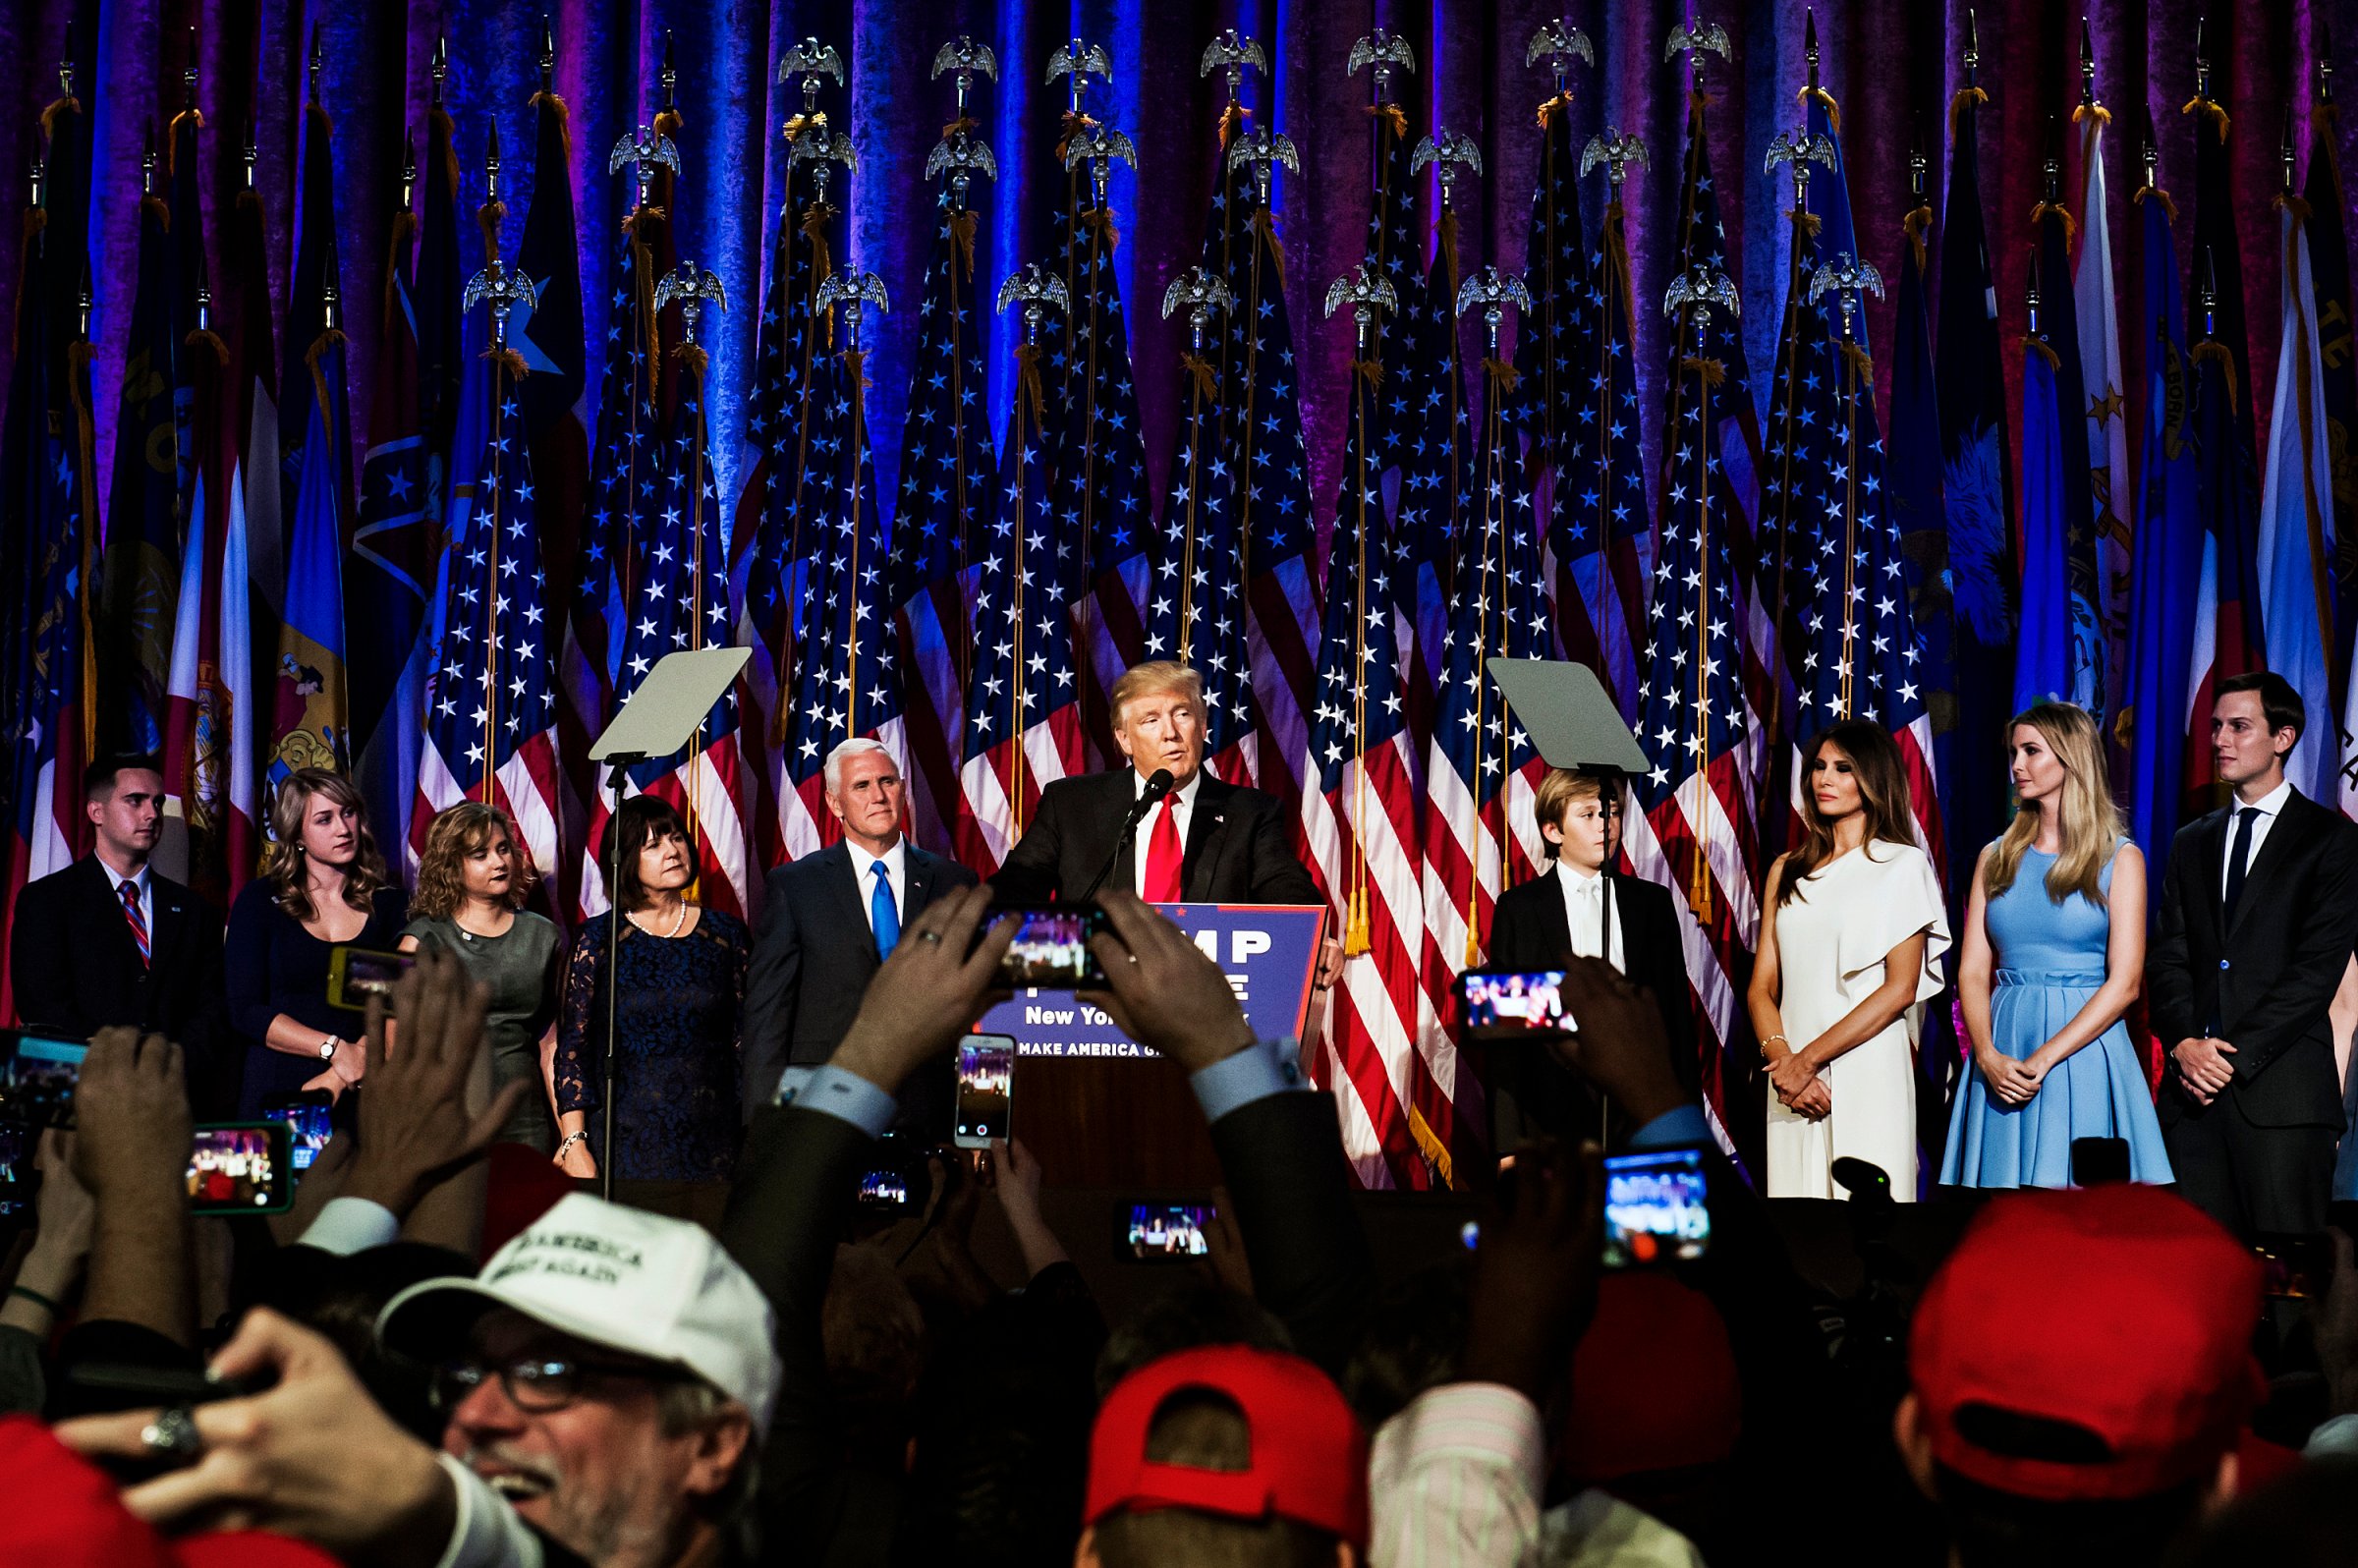 President-elect Donald Trump addresses his Victory Night party on Tuesday, Nov. 8, 2016 in New York's Manhattan borough. Trump defeated Democratic nominee Hillary Clinton in the contest for president of the United States.President-elect Donald Trump addresses his Victory Night party on Tuesday, Nov. 8, 2016 in New York's Manhattan borough. Trump defeated Democratic nominee Hillary Clinton in the contest for president of the United States.